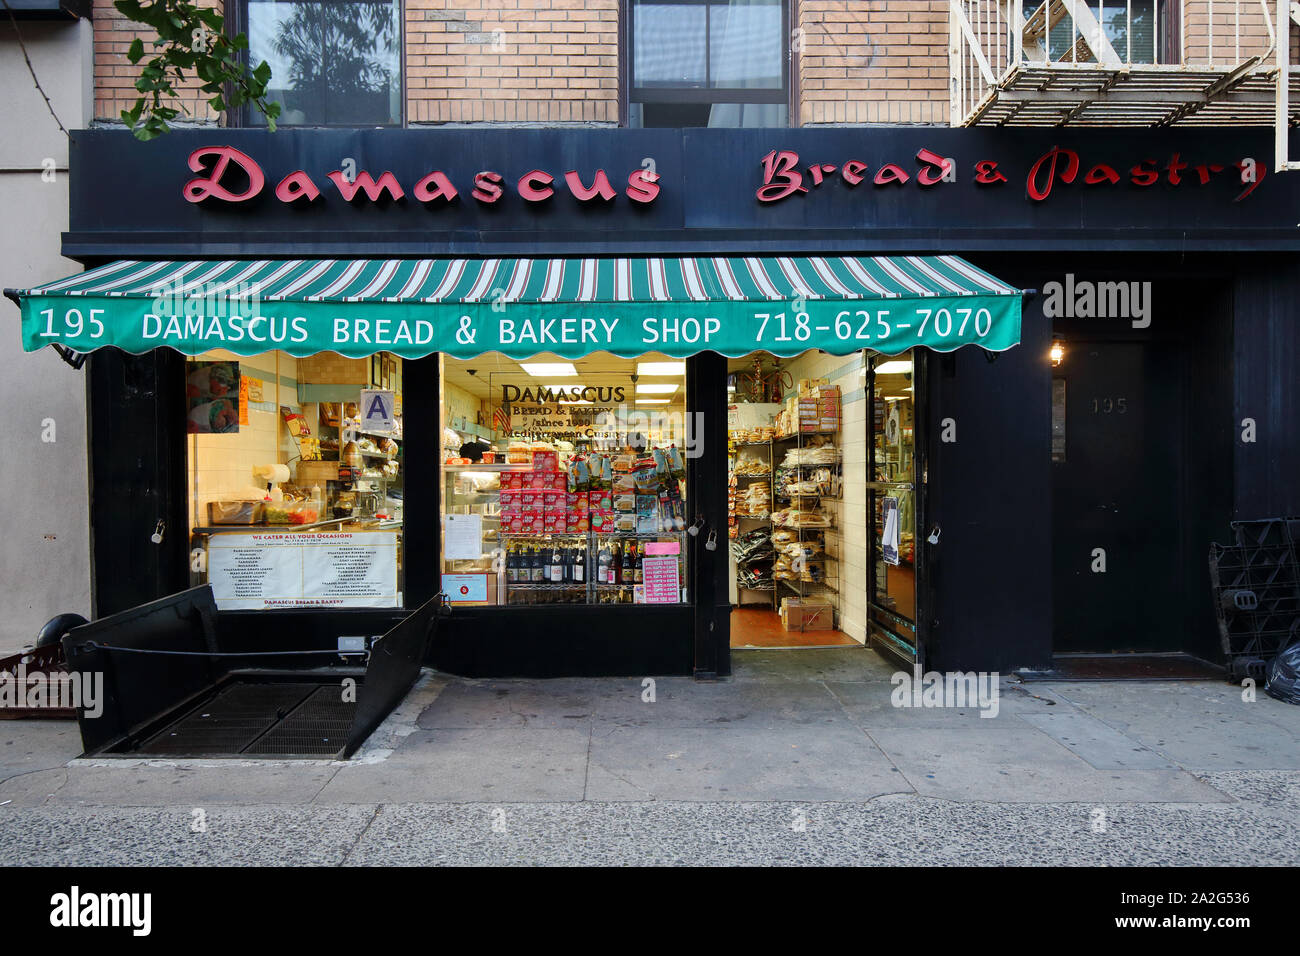 Damascus Bread & Pastry Shop, 195 Atlantic Avenue, Brooklyn, NY. exterior storefront of a syrian, middle eastern bakery in brooklyn heights Stock Photo